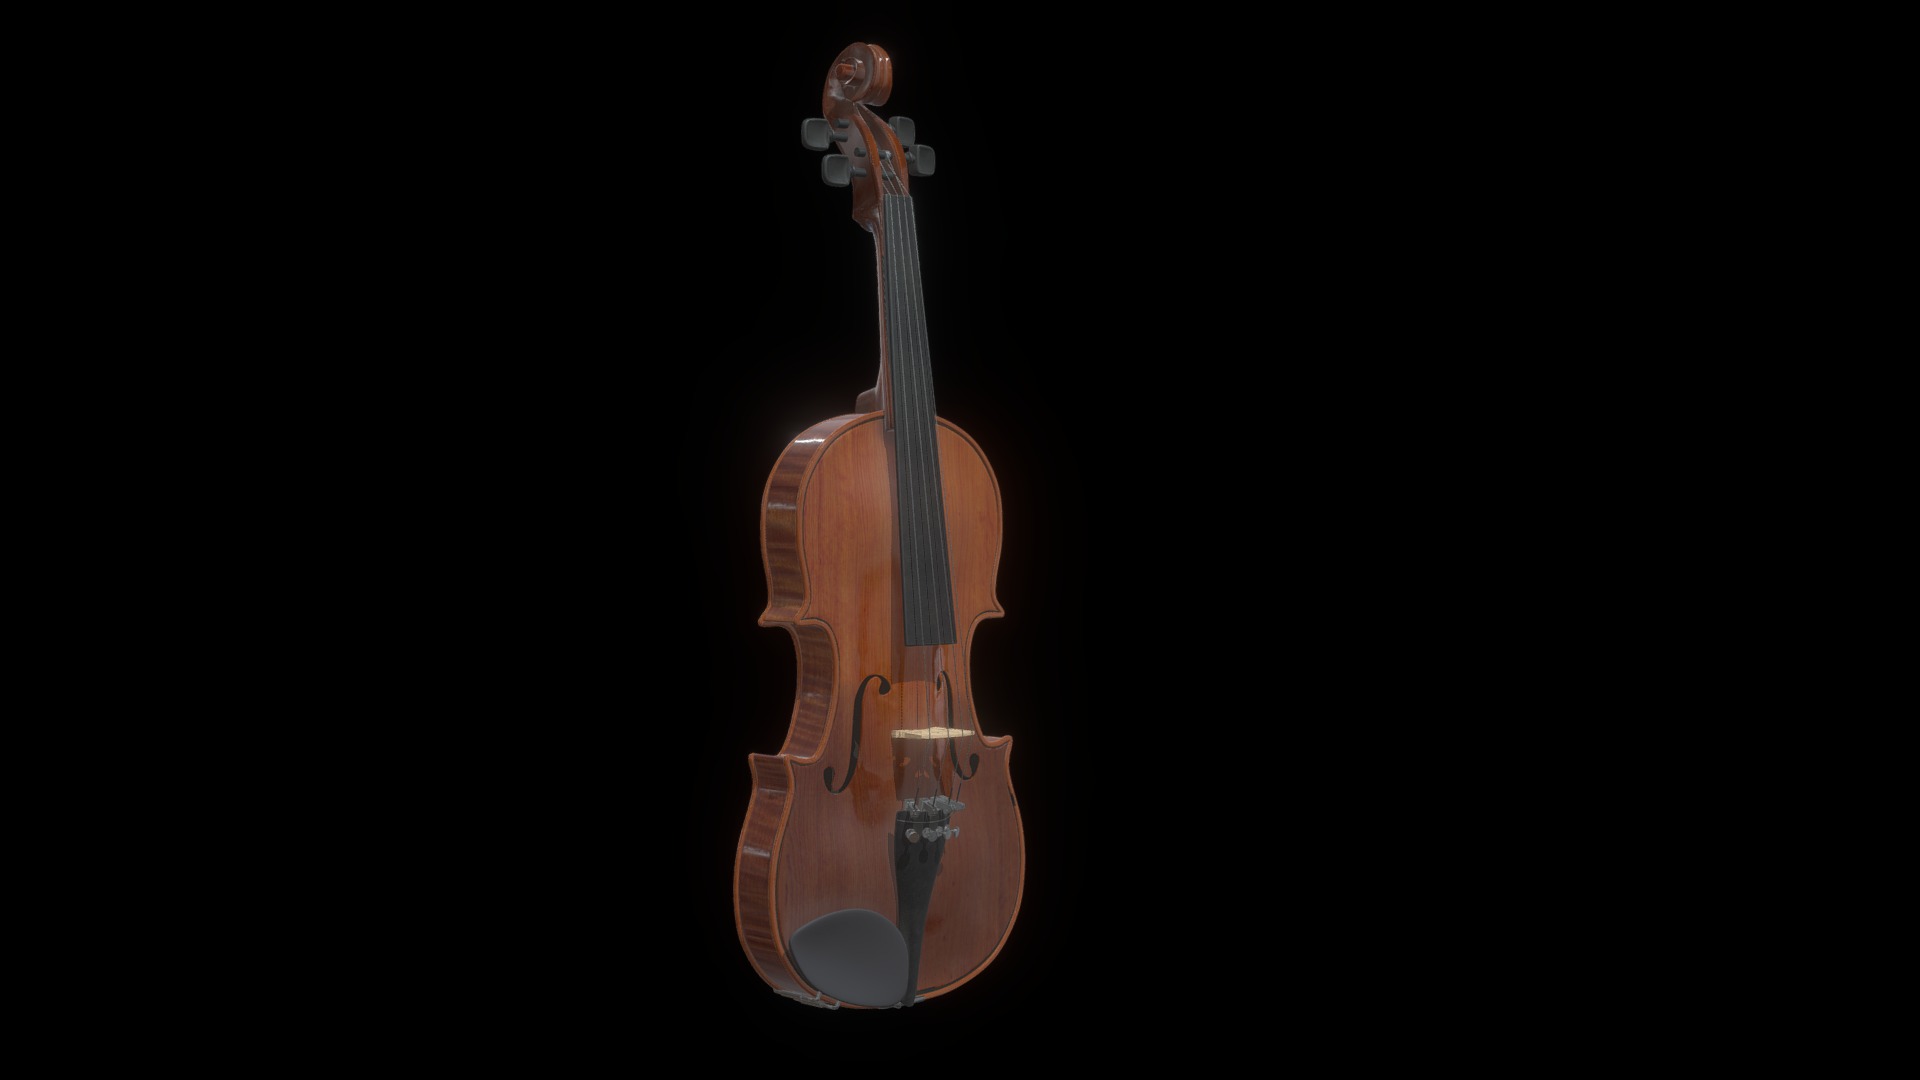 3D model Adult Violin - This is a 3D model of the Adult Violin. The 3D model is about a brown guitar on a black background.